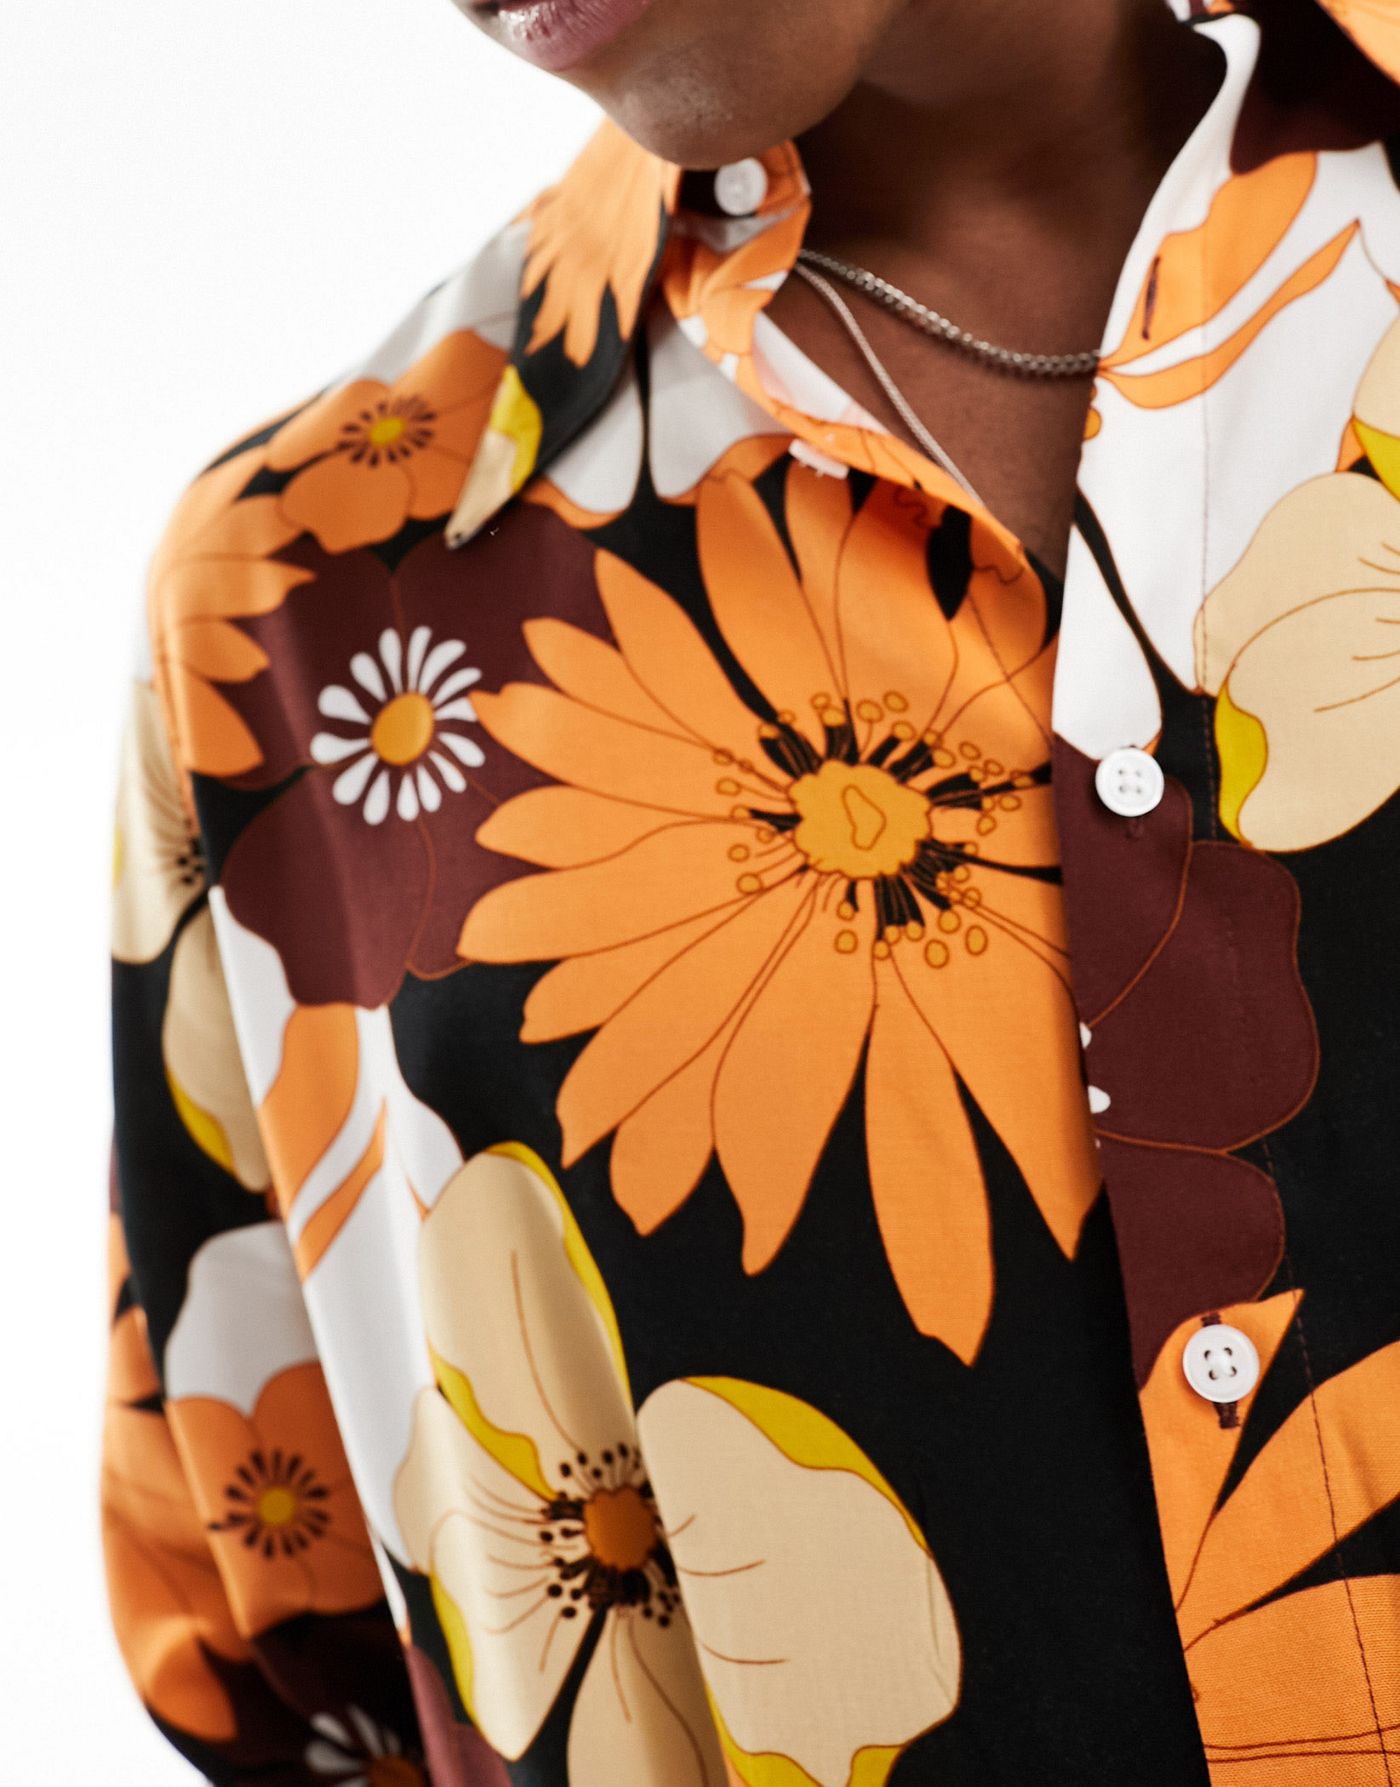 ASOS DESIGN relaxed shirt with 70s collar in orange and brown floral print